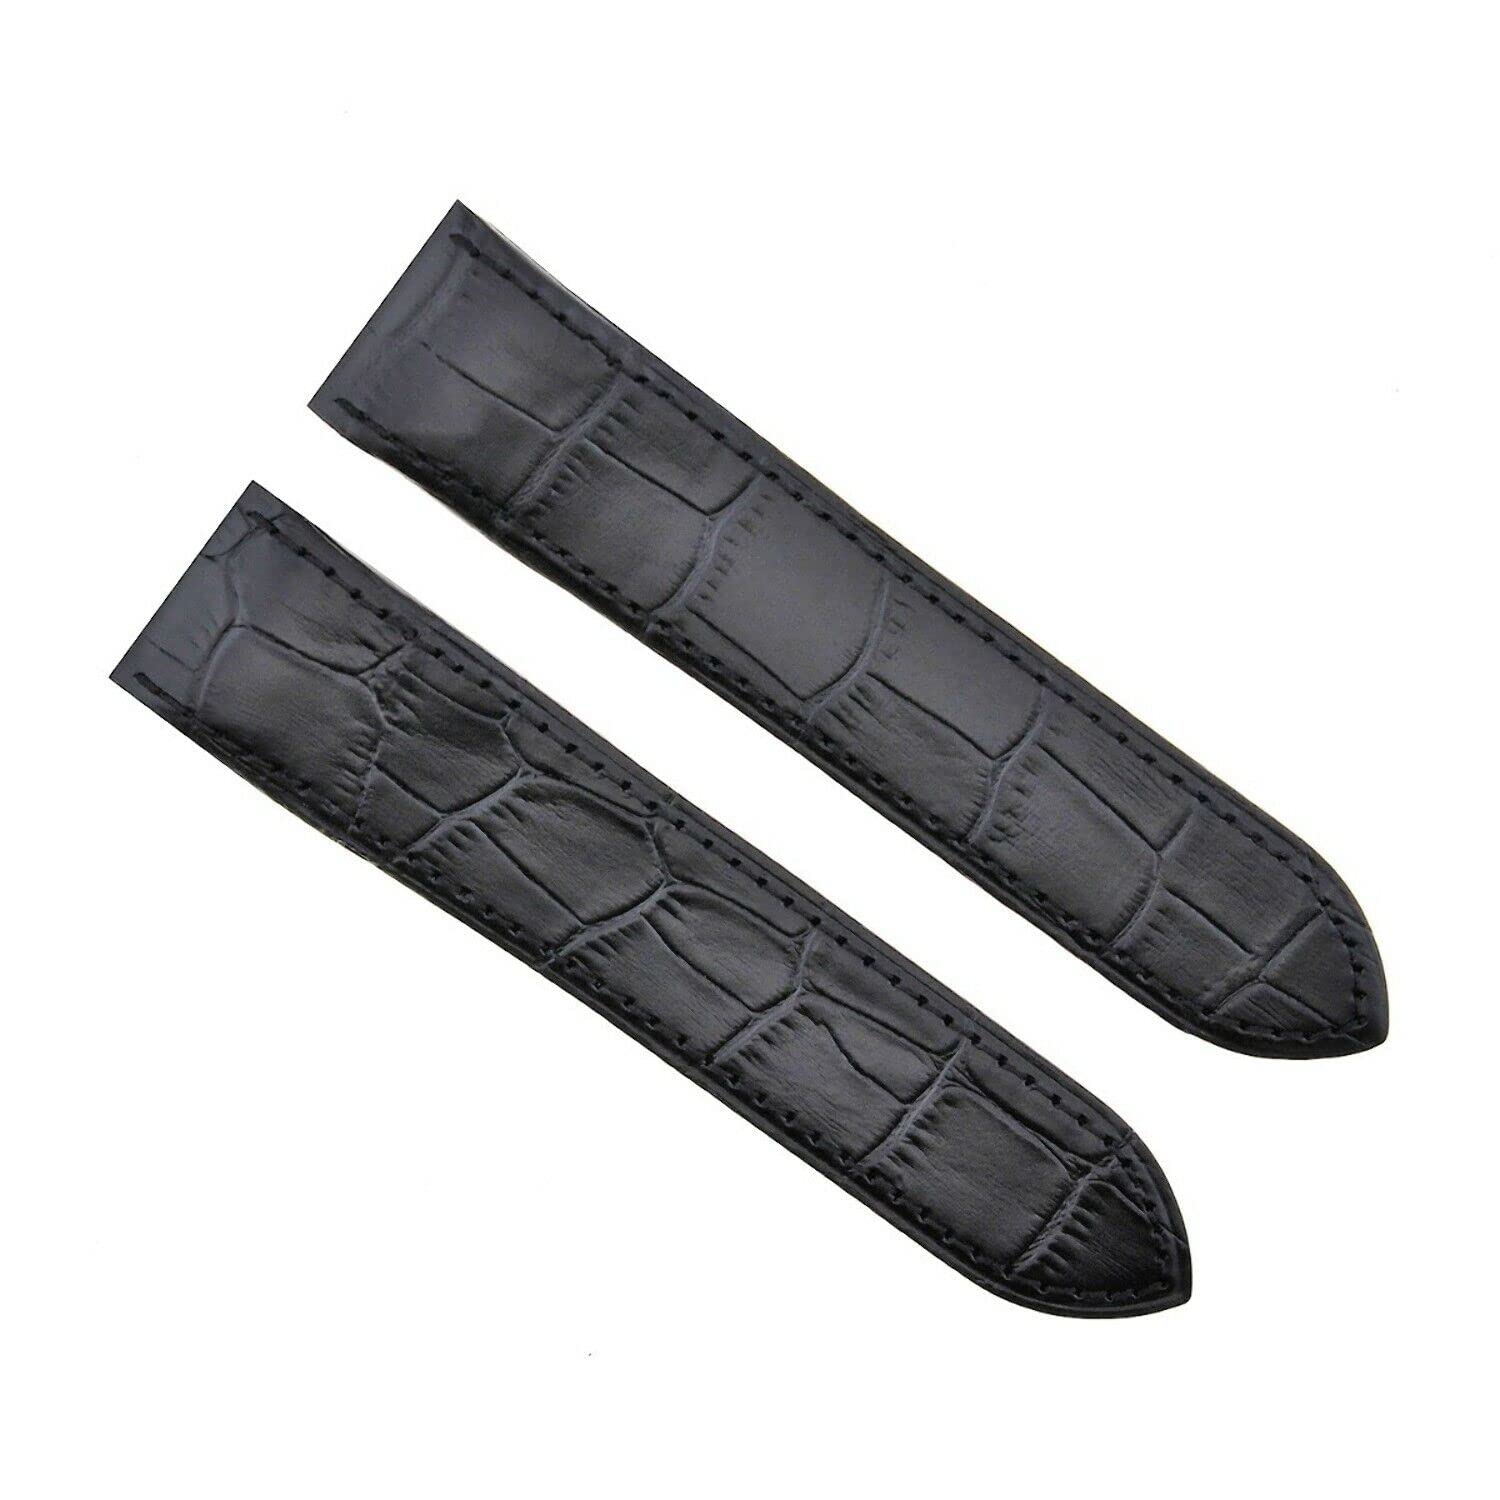 20-23-24.5mm Leather Watch Band Strap Compatible with Cartier Santos 100 XL Chronograph